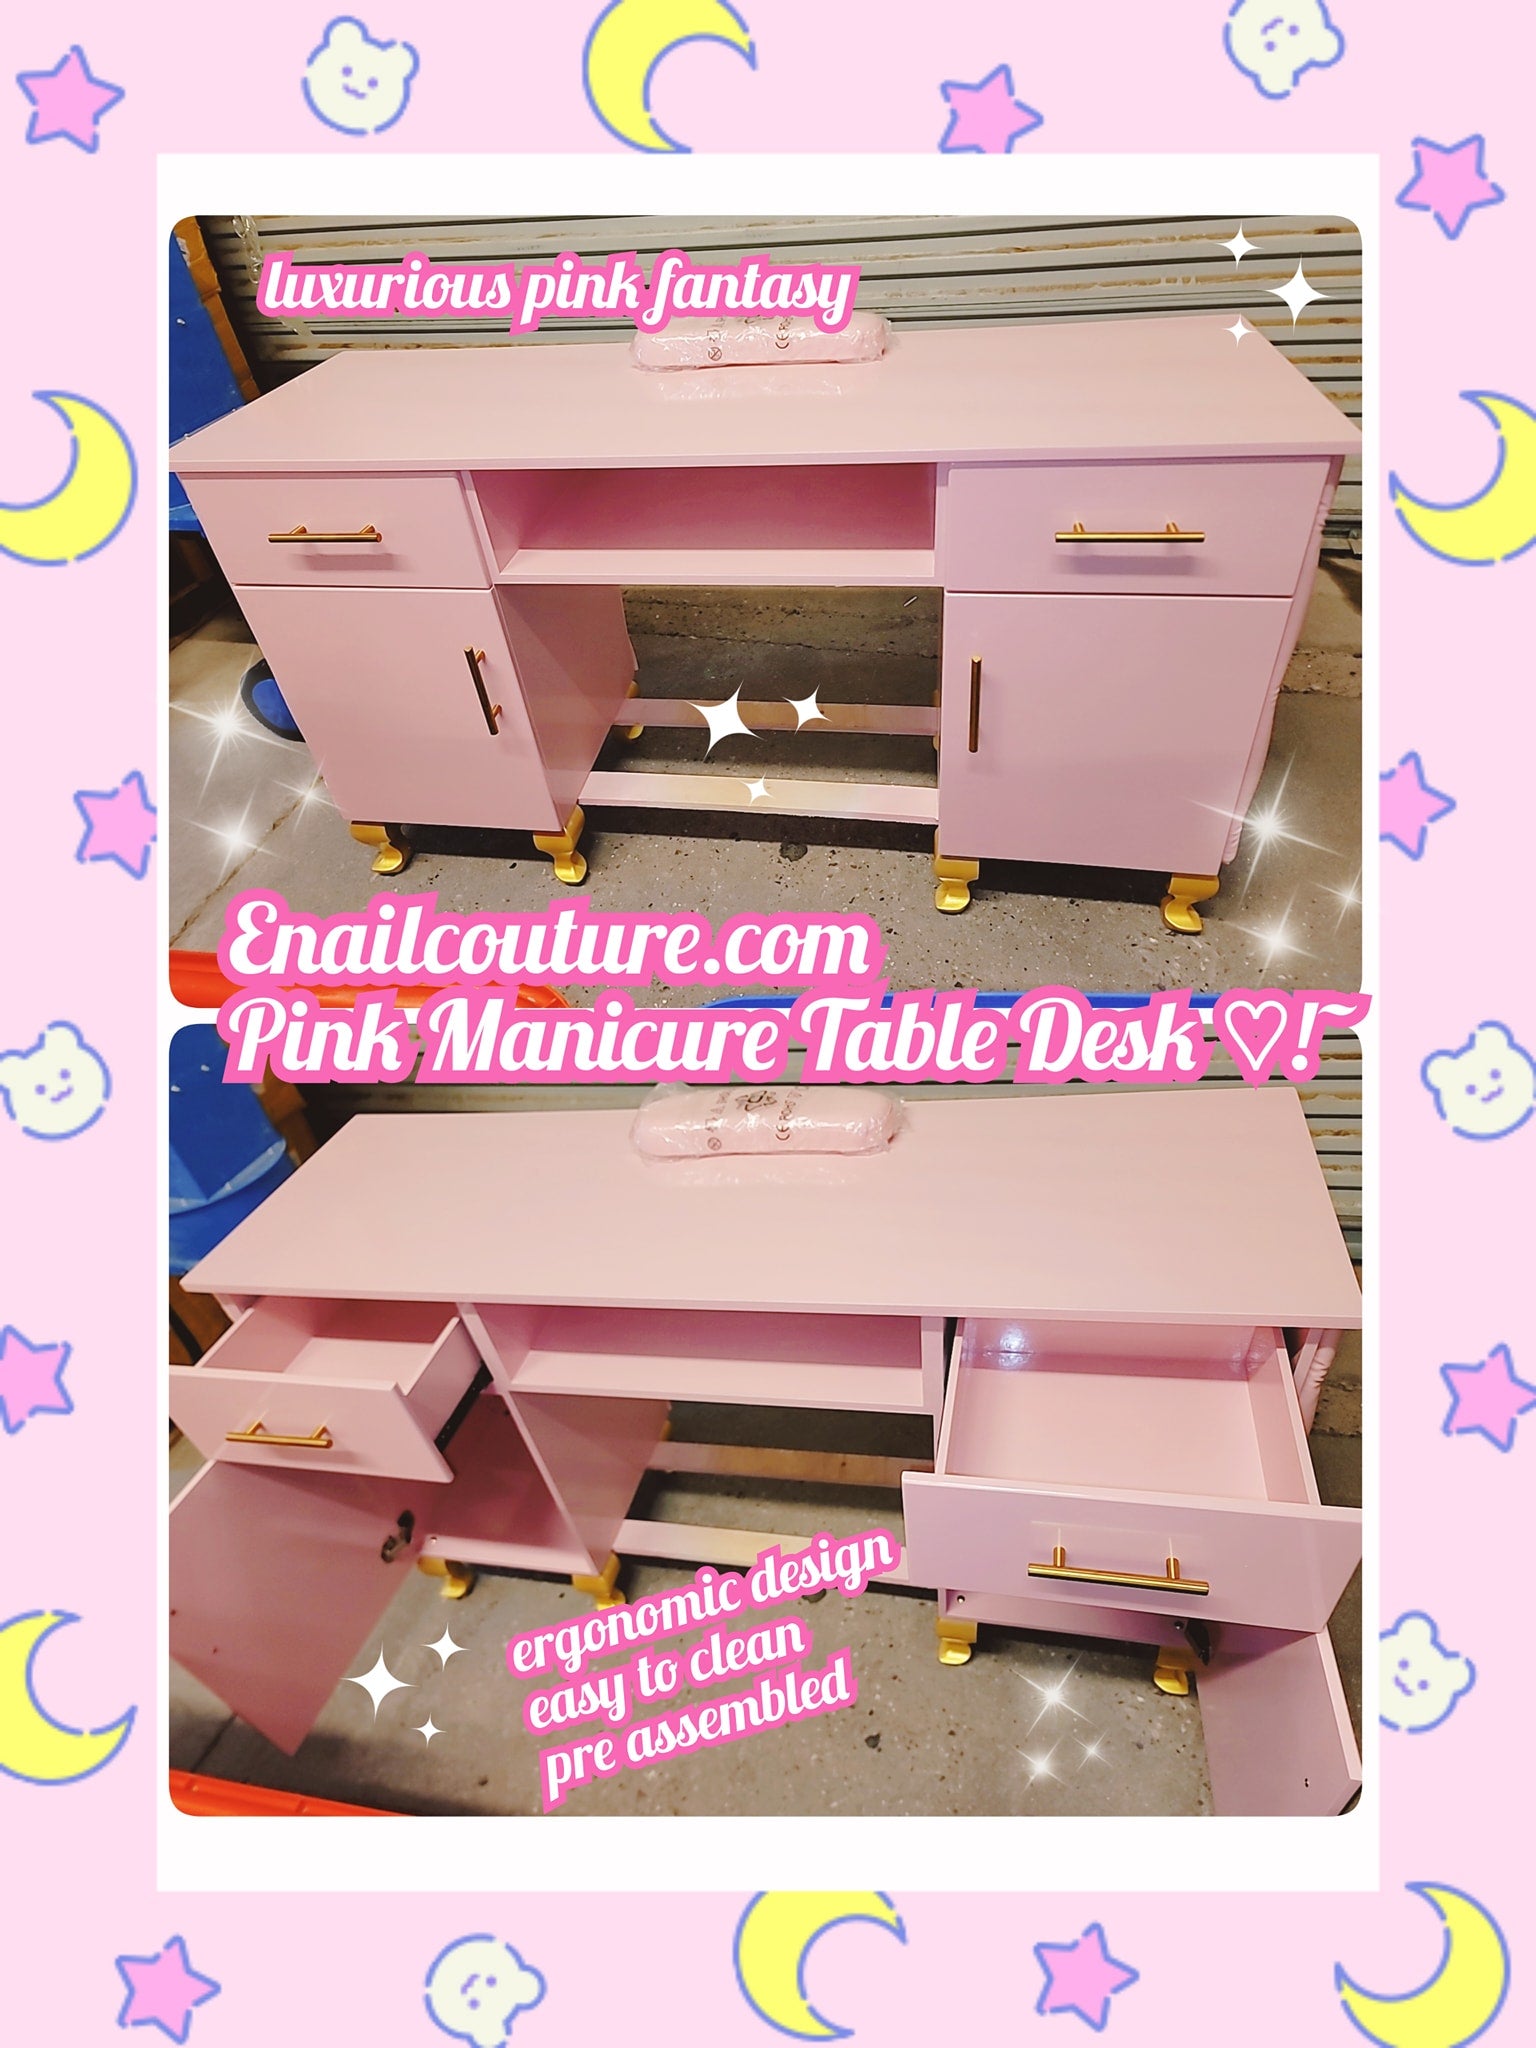 Pink Manicure Table Desk! (Manicure Table, Nail Makeup Desk with Drawers, Storage Beauty Salon Workstation Pink)